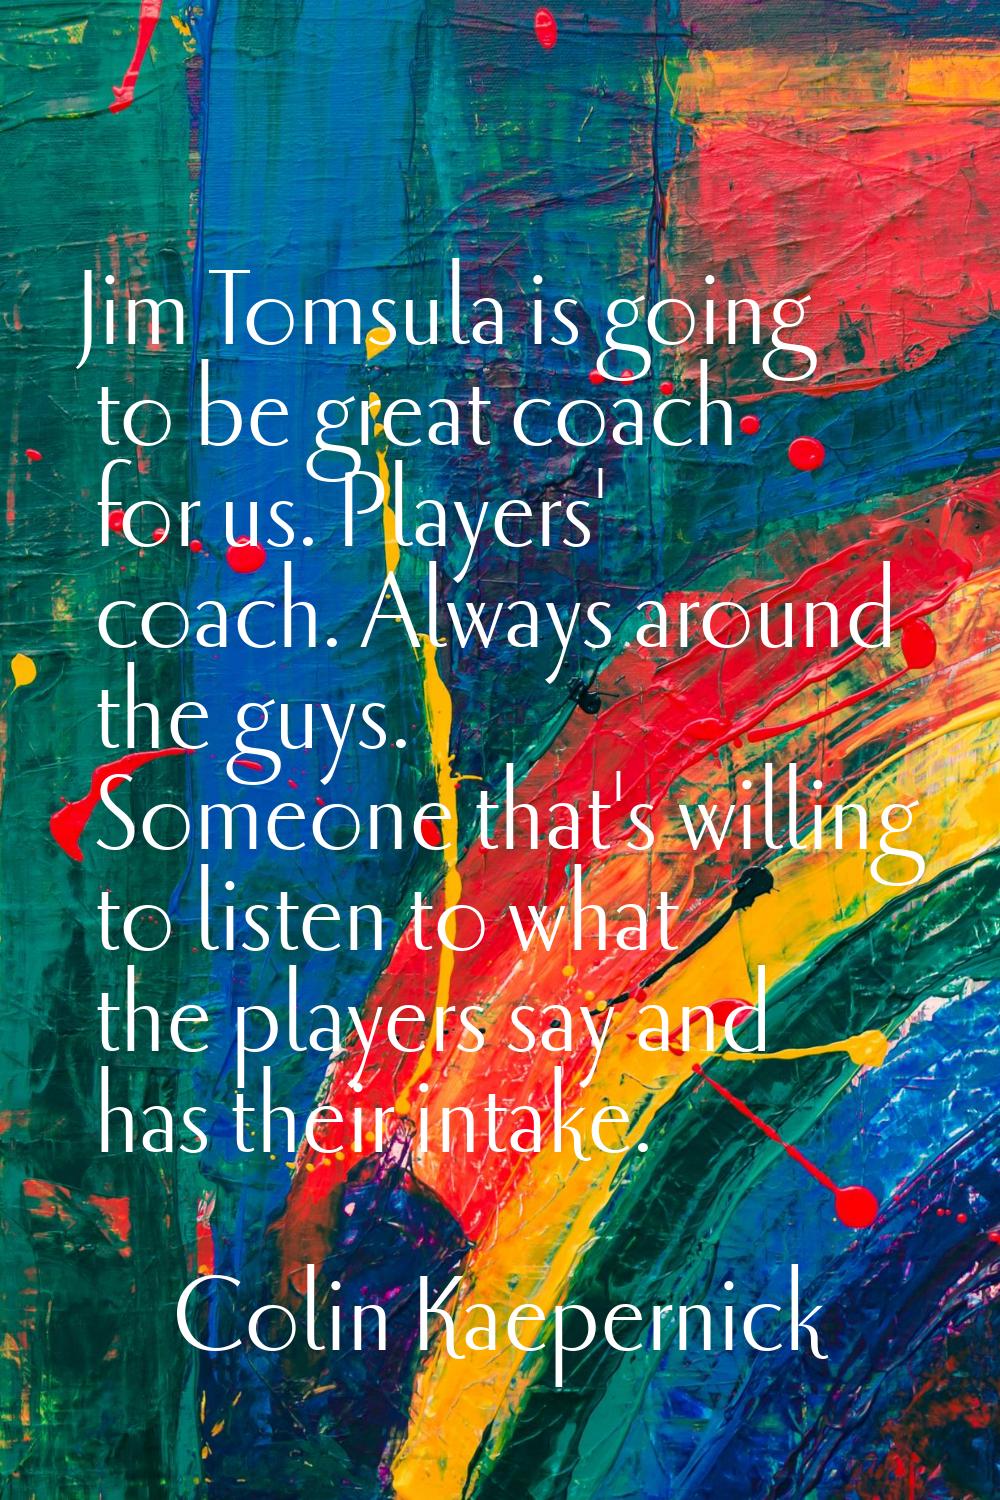 Jim Tomsula is going to be great coach for us. Players' coach. Always around the guys. Someone that